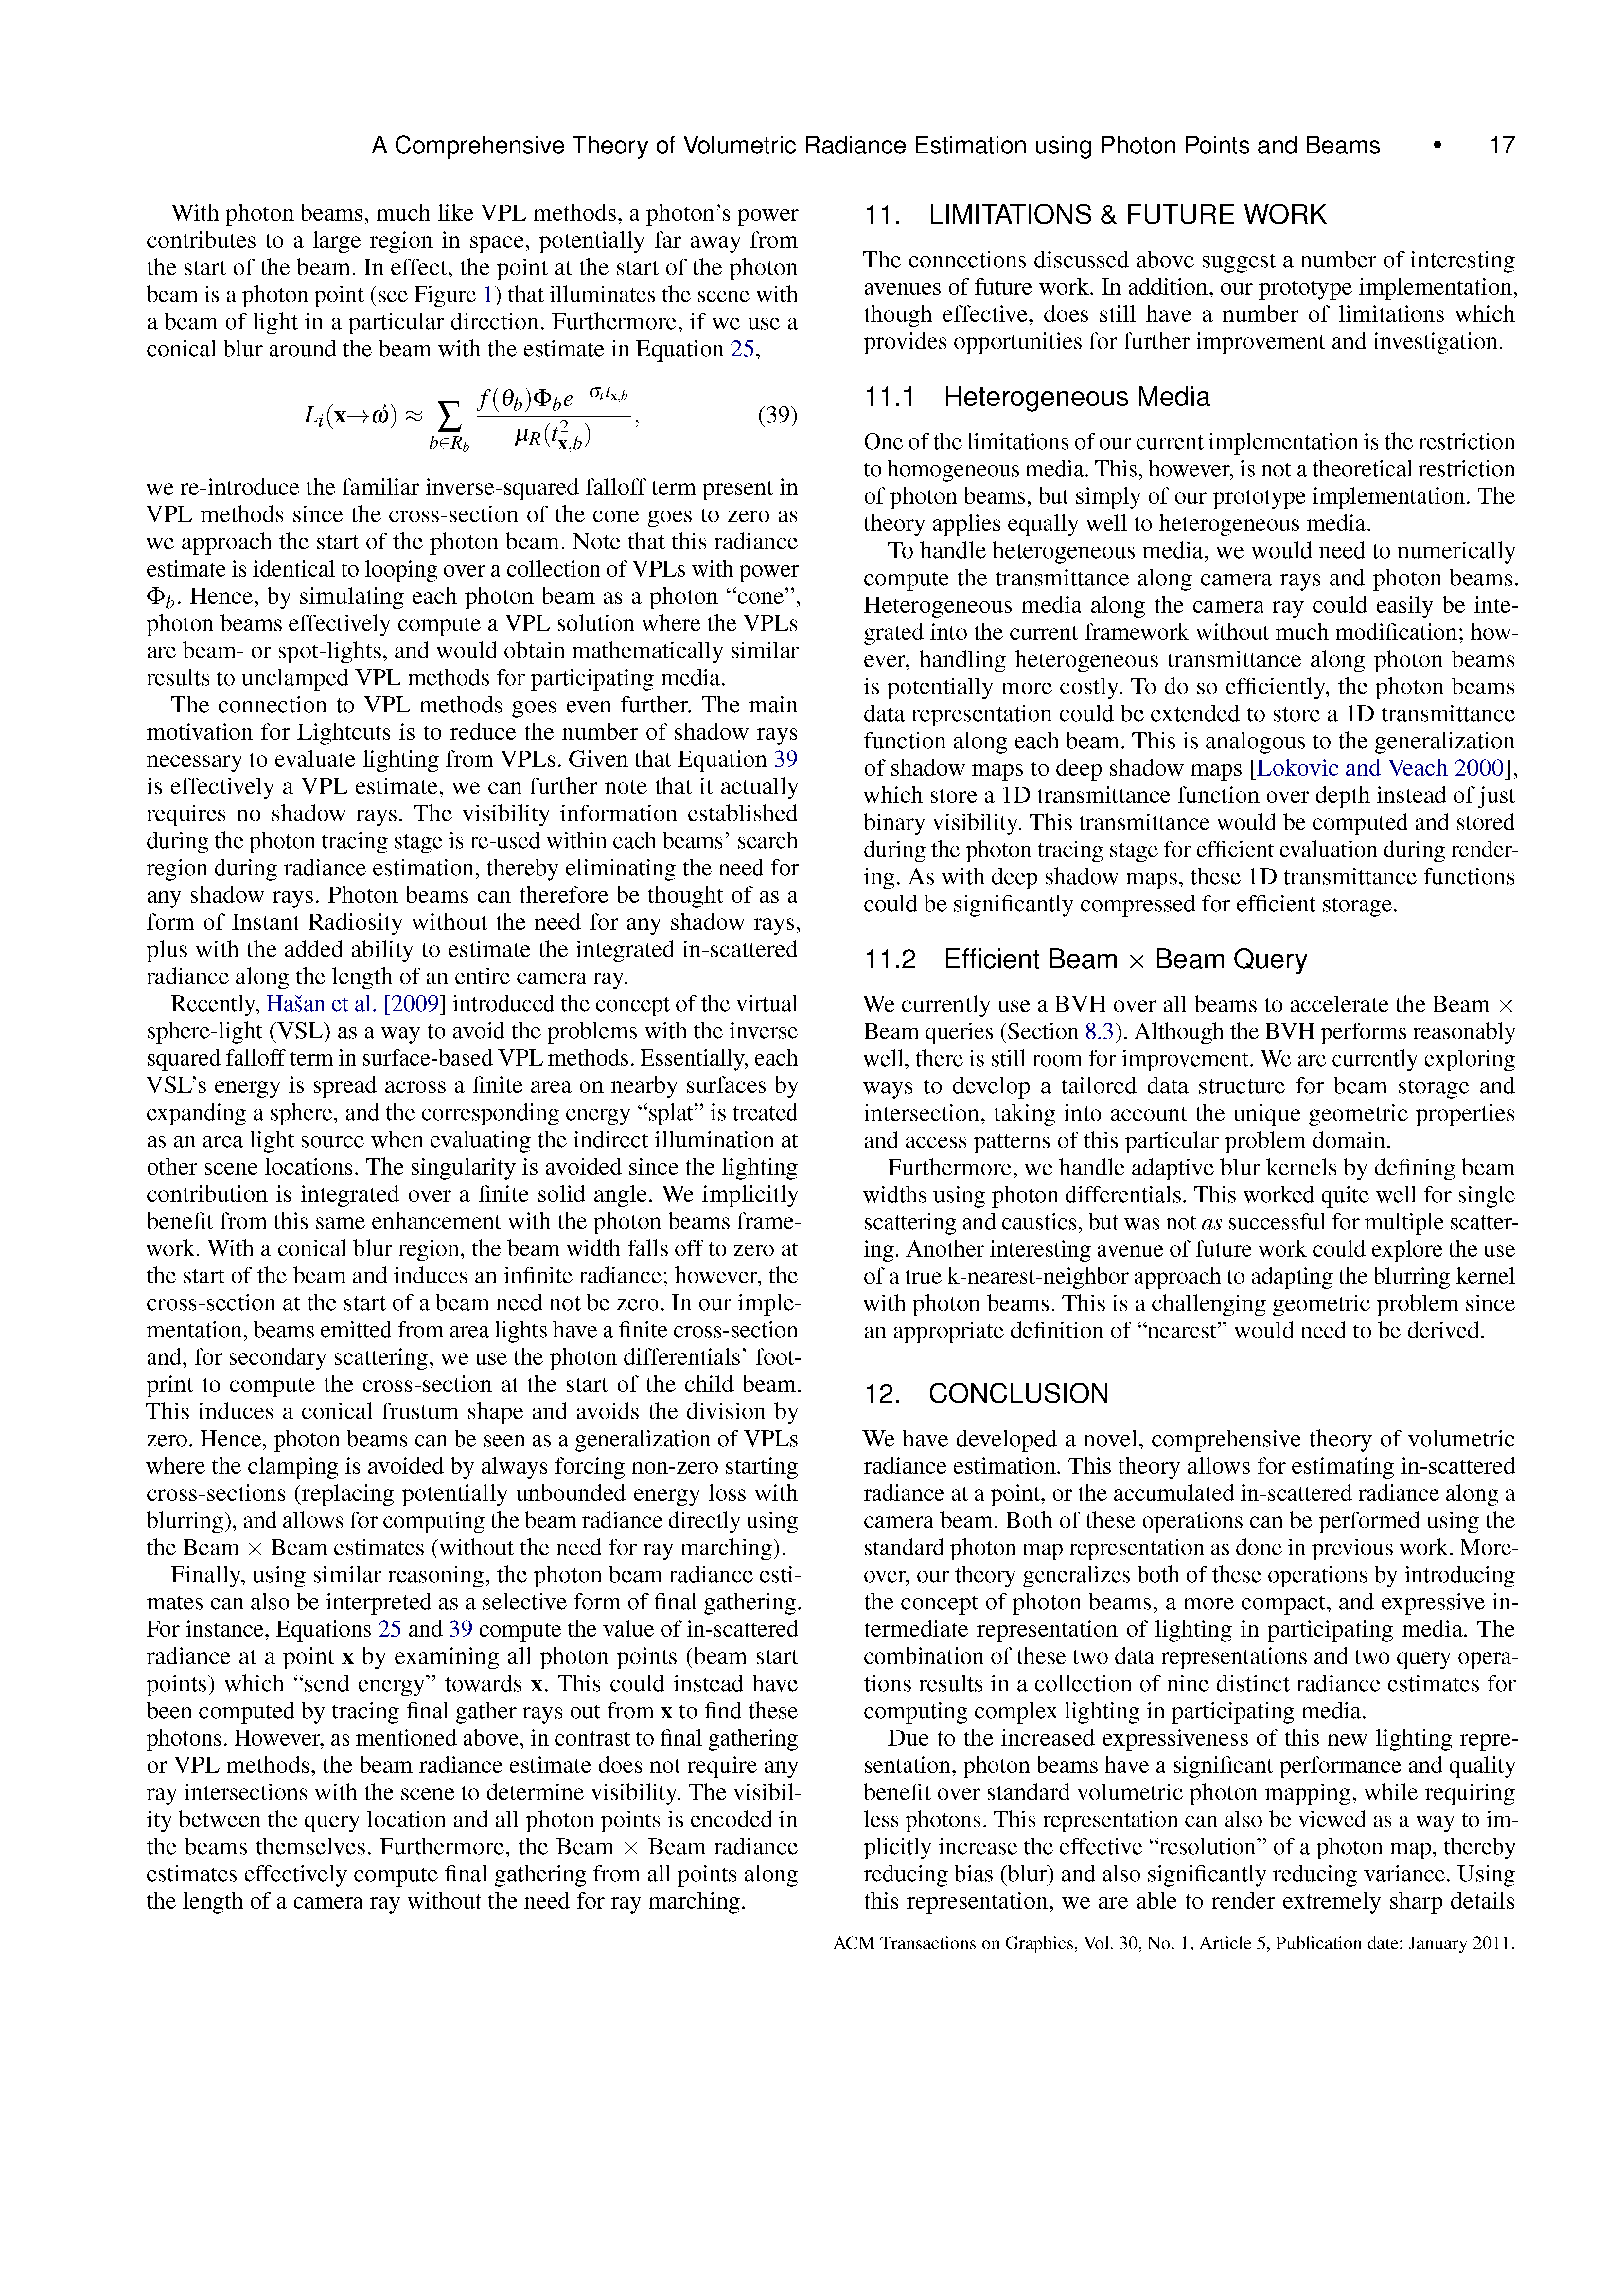 A Comprehensive Theory of Volumetric Radiance Estimation Using Photon Points and Beams Page 17